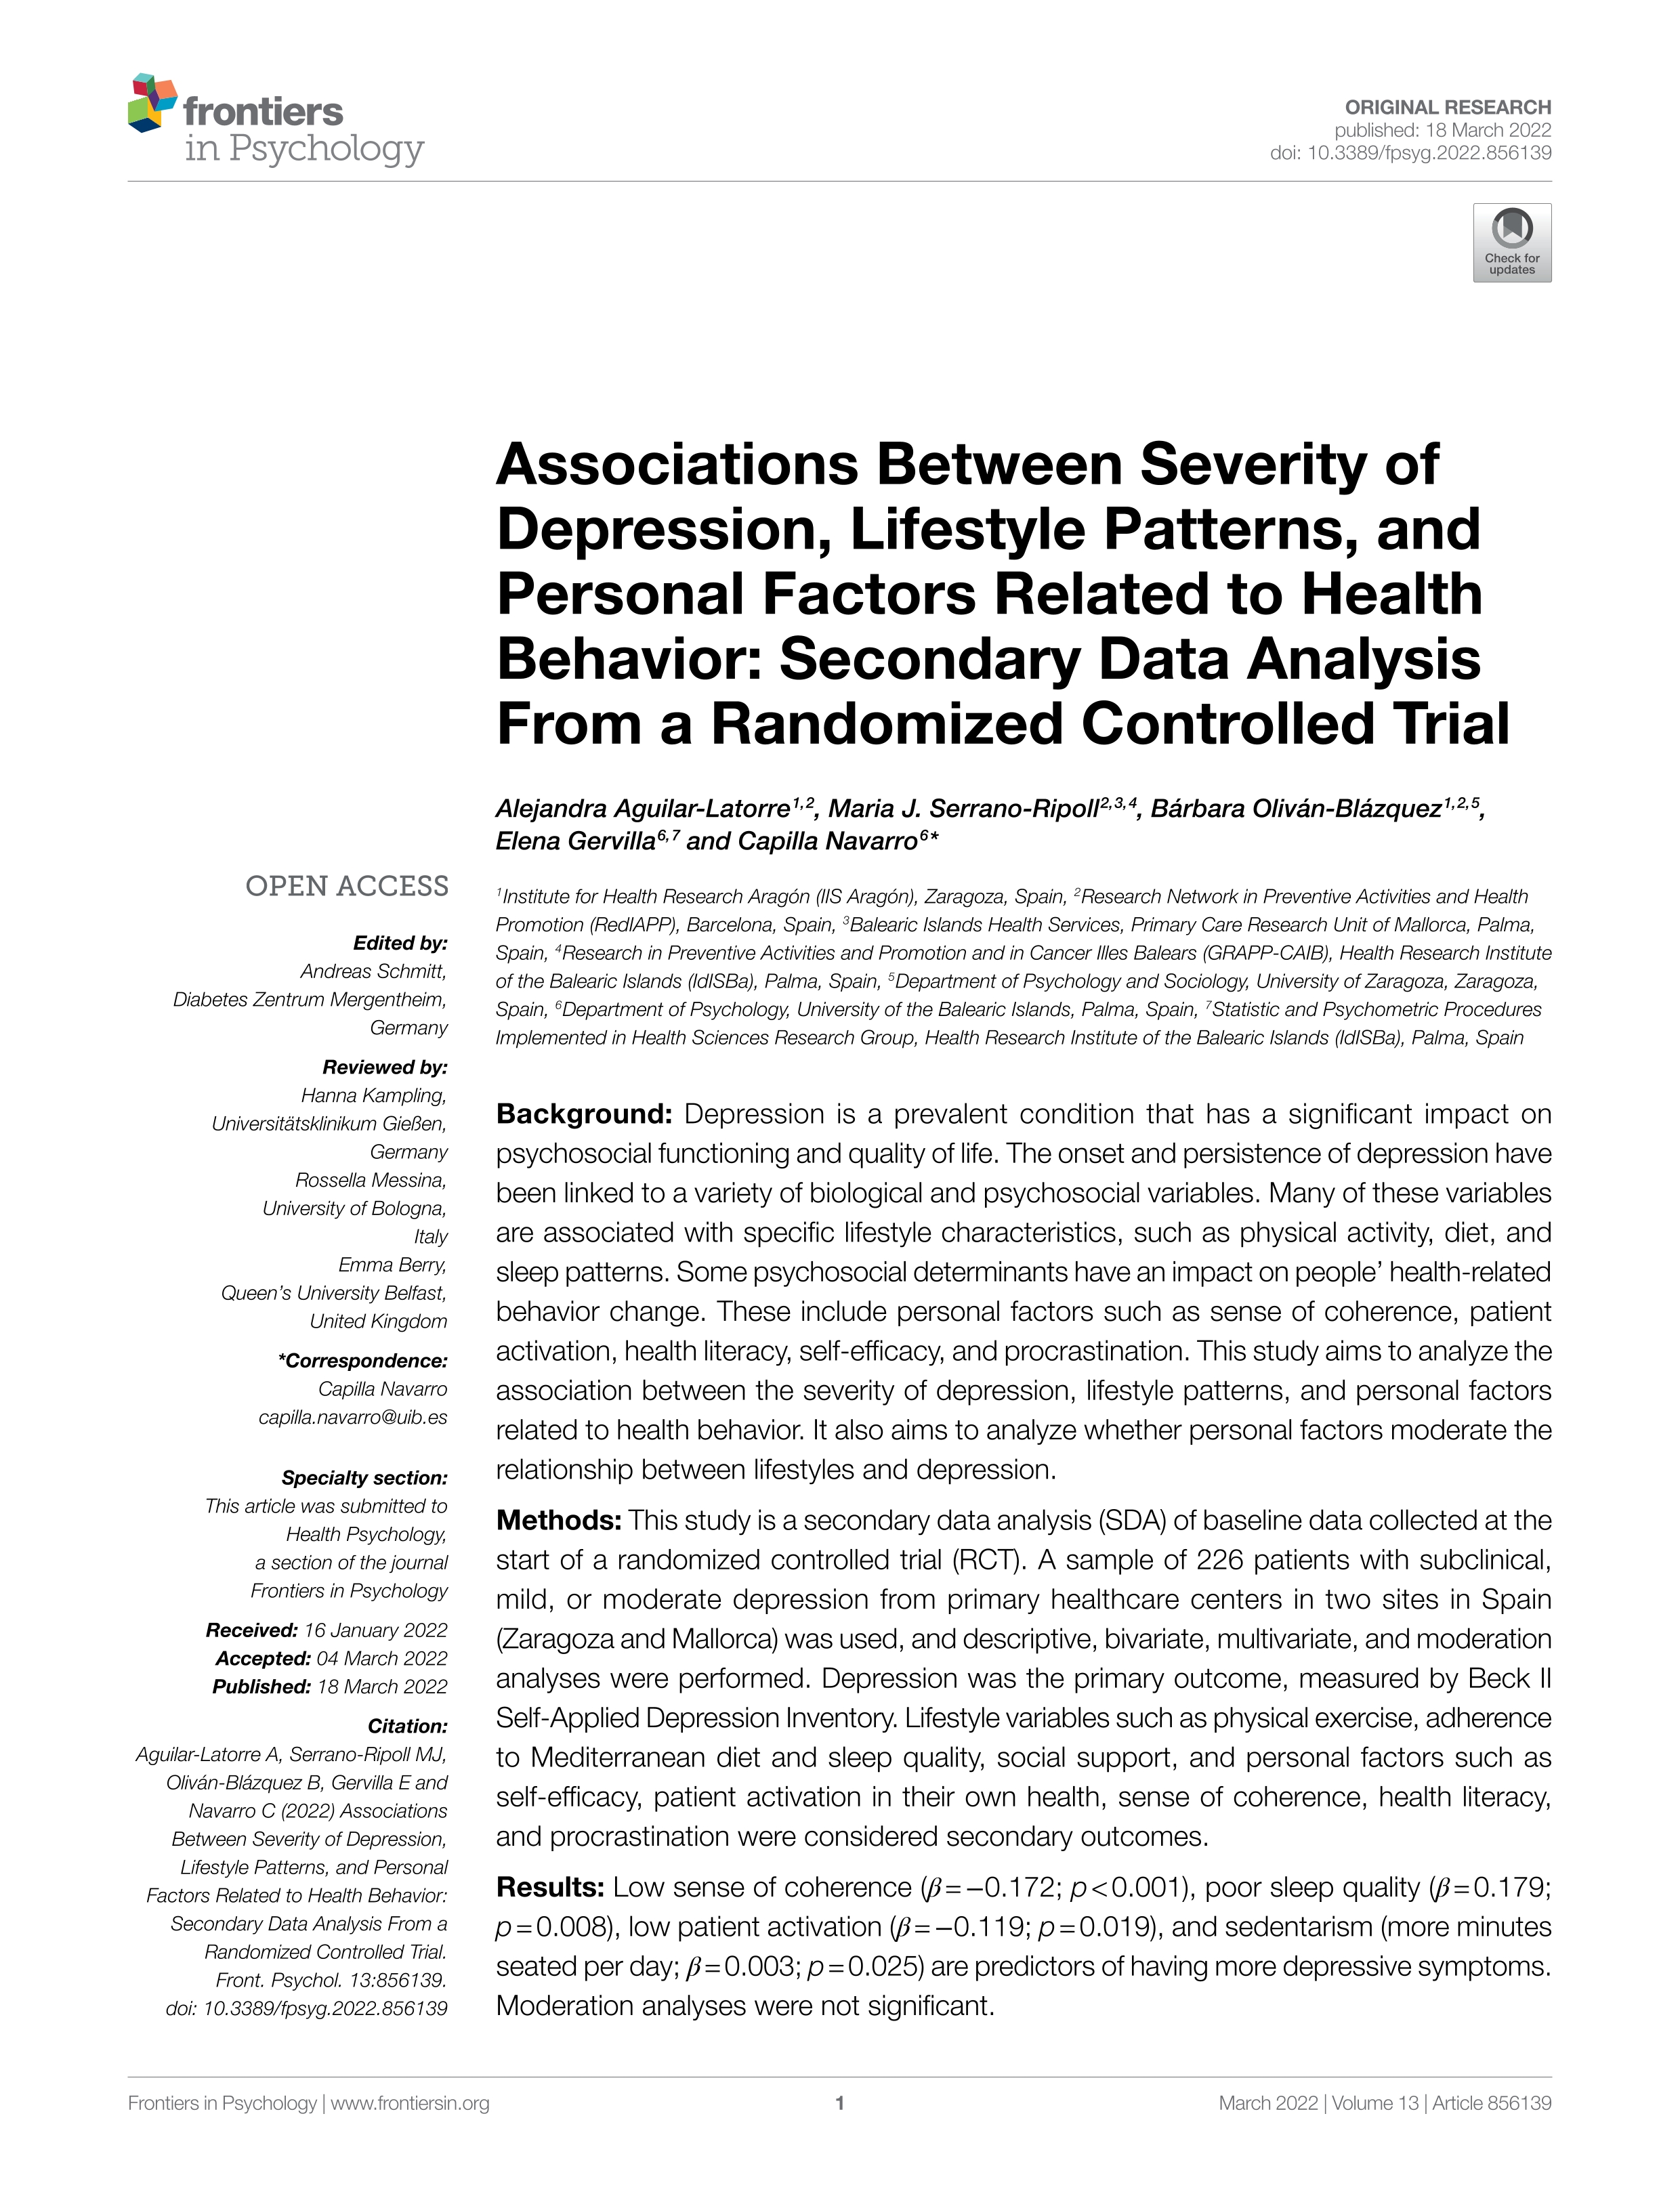 Associations Between Severity of Depression, Lifestyle Patterns, and Personal Factors Related to Health Behavior: Secondary Data Analysis From a Randomized Controlled Trial